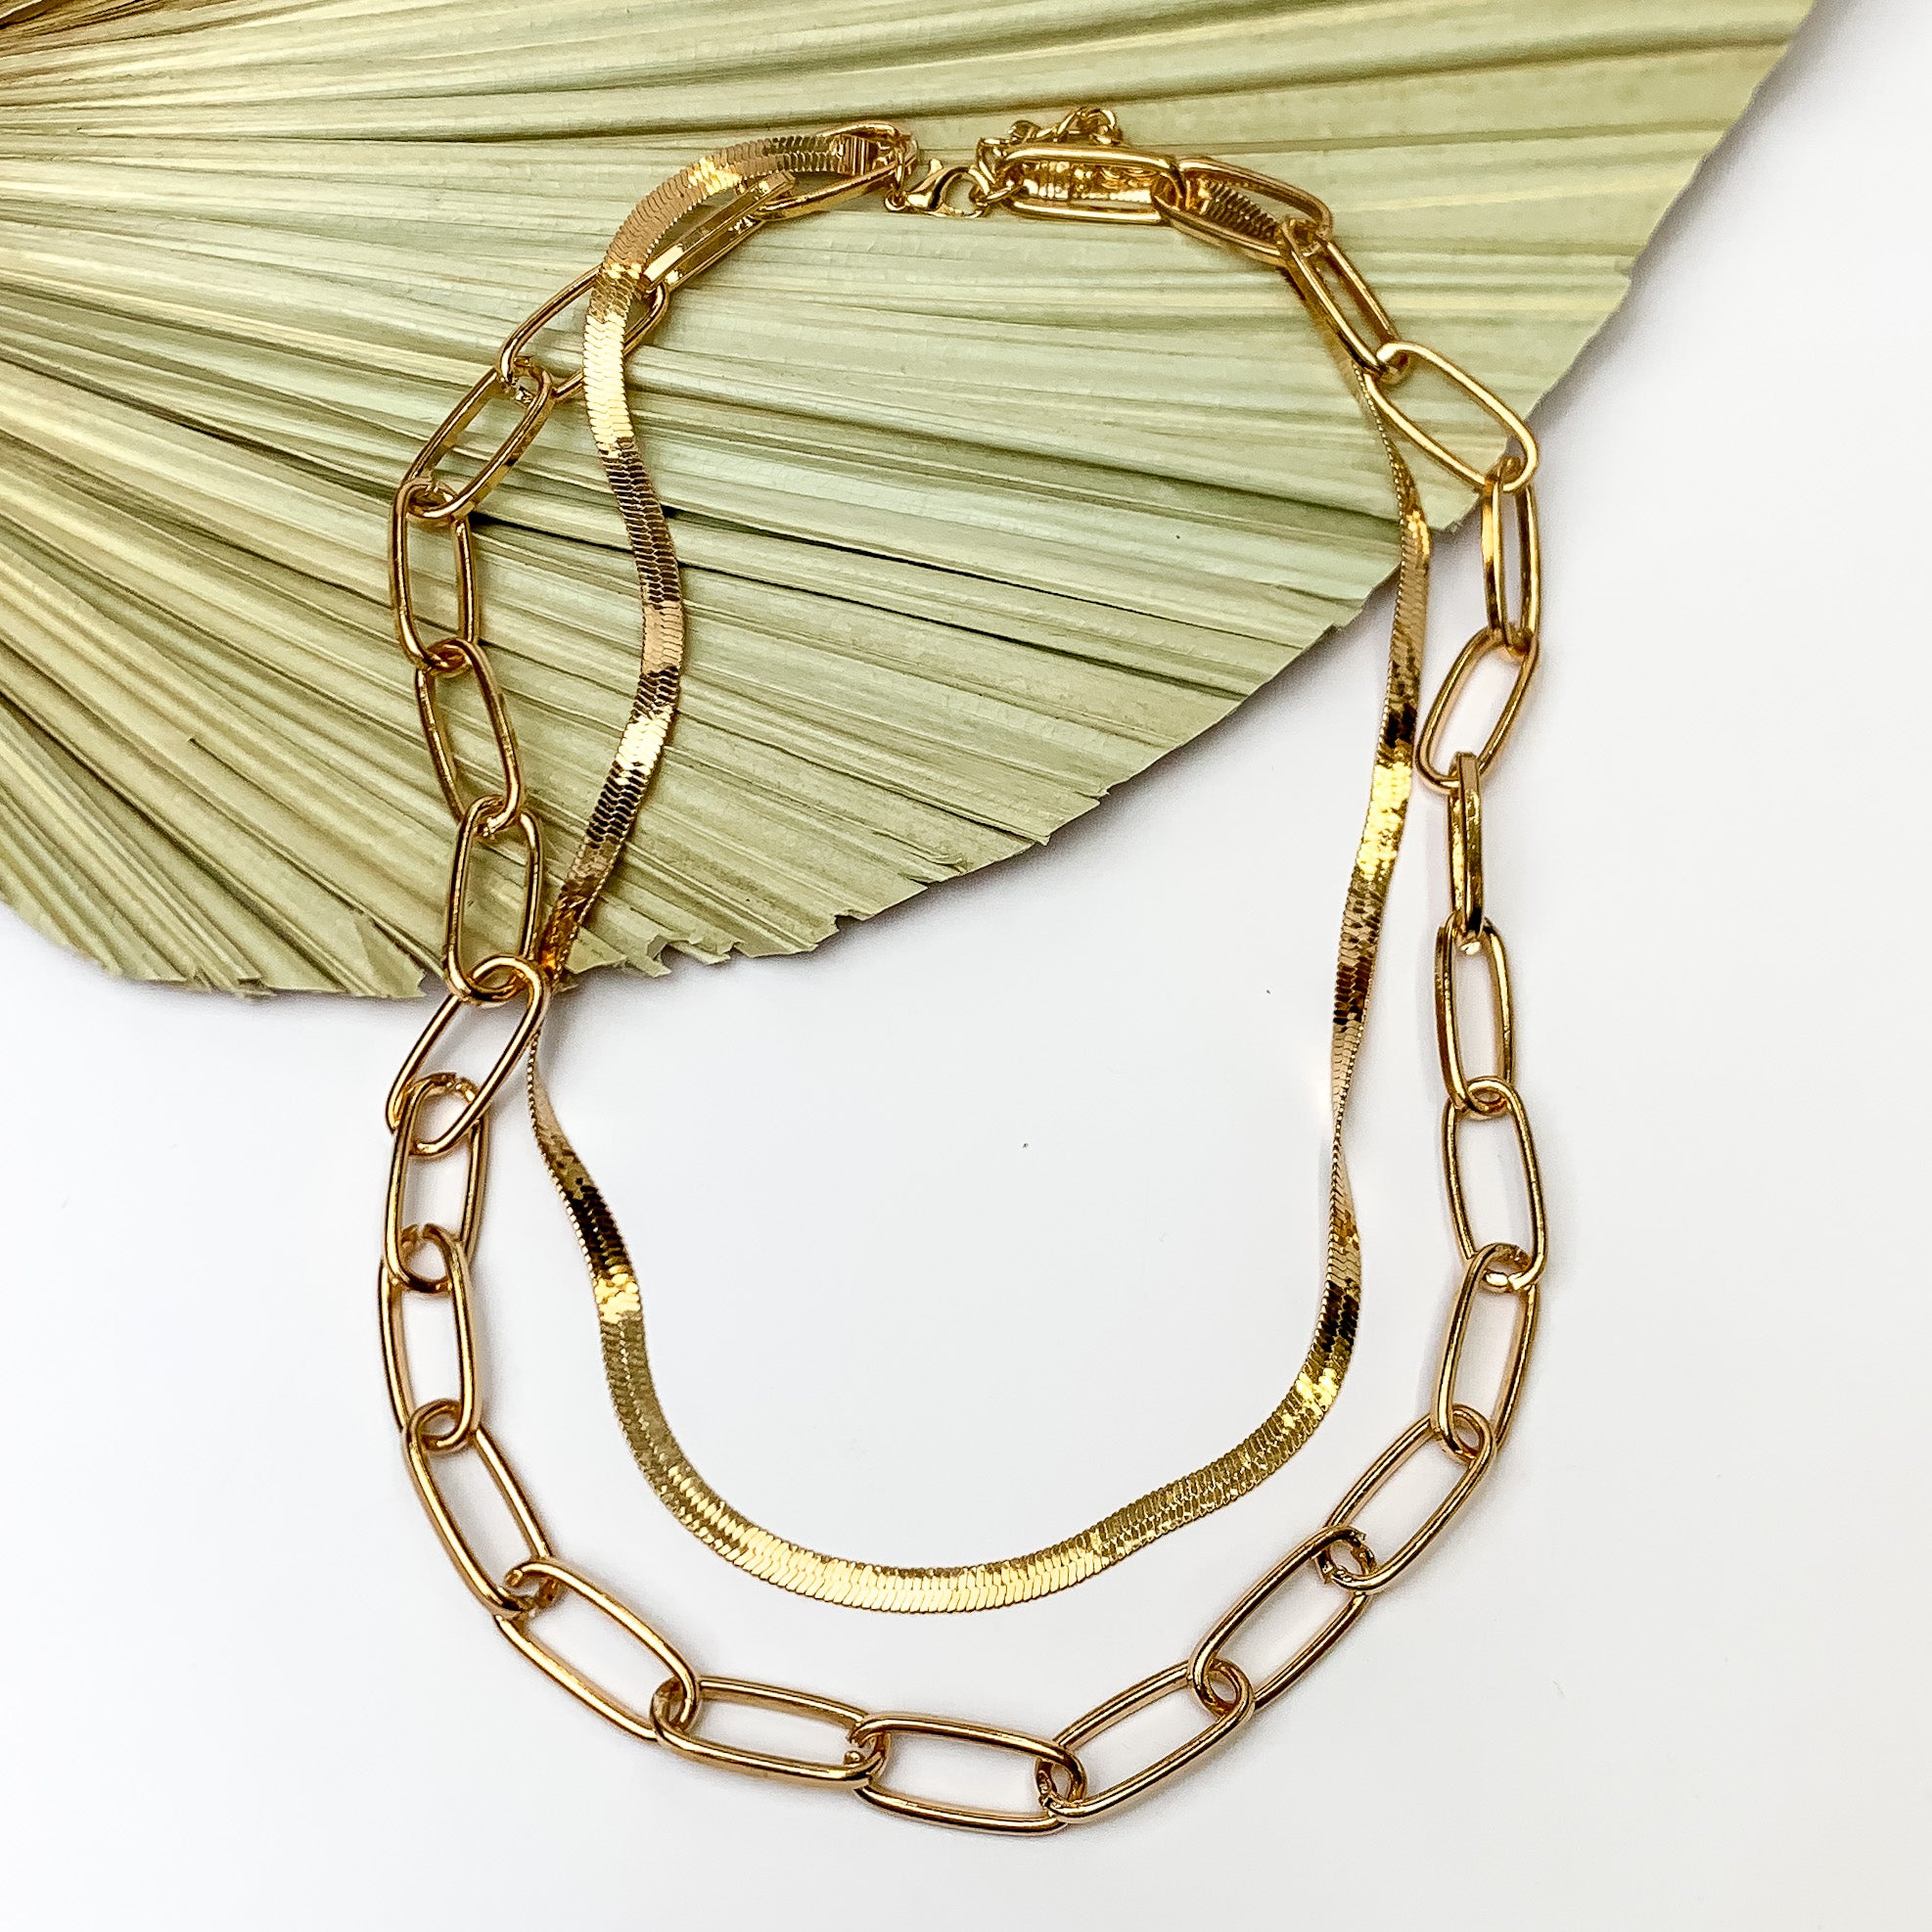 Gold Tone Double Layered Chain Necklace. Pictured on a white background with the necklace laying on a leaf fan.